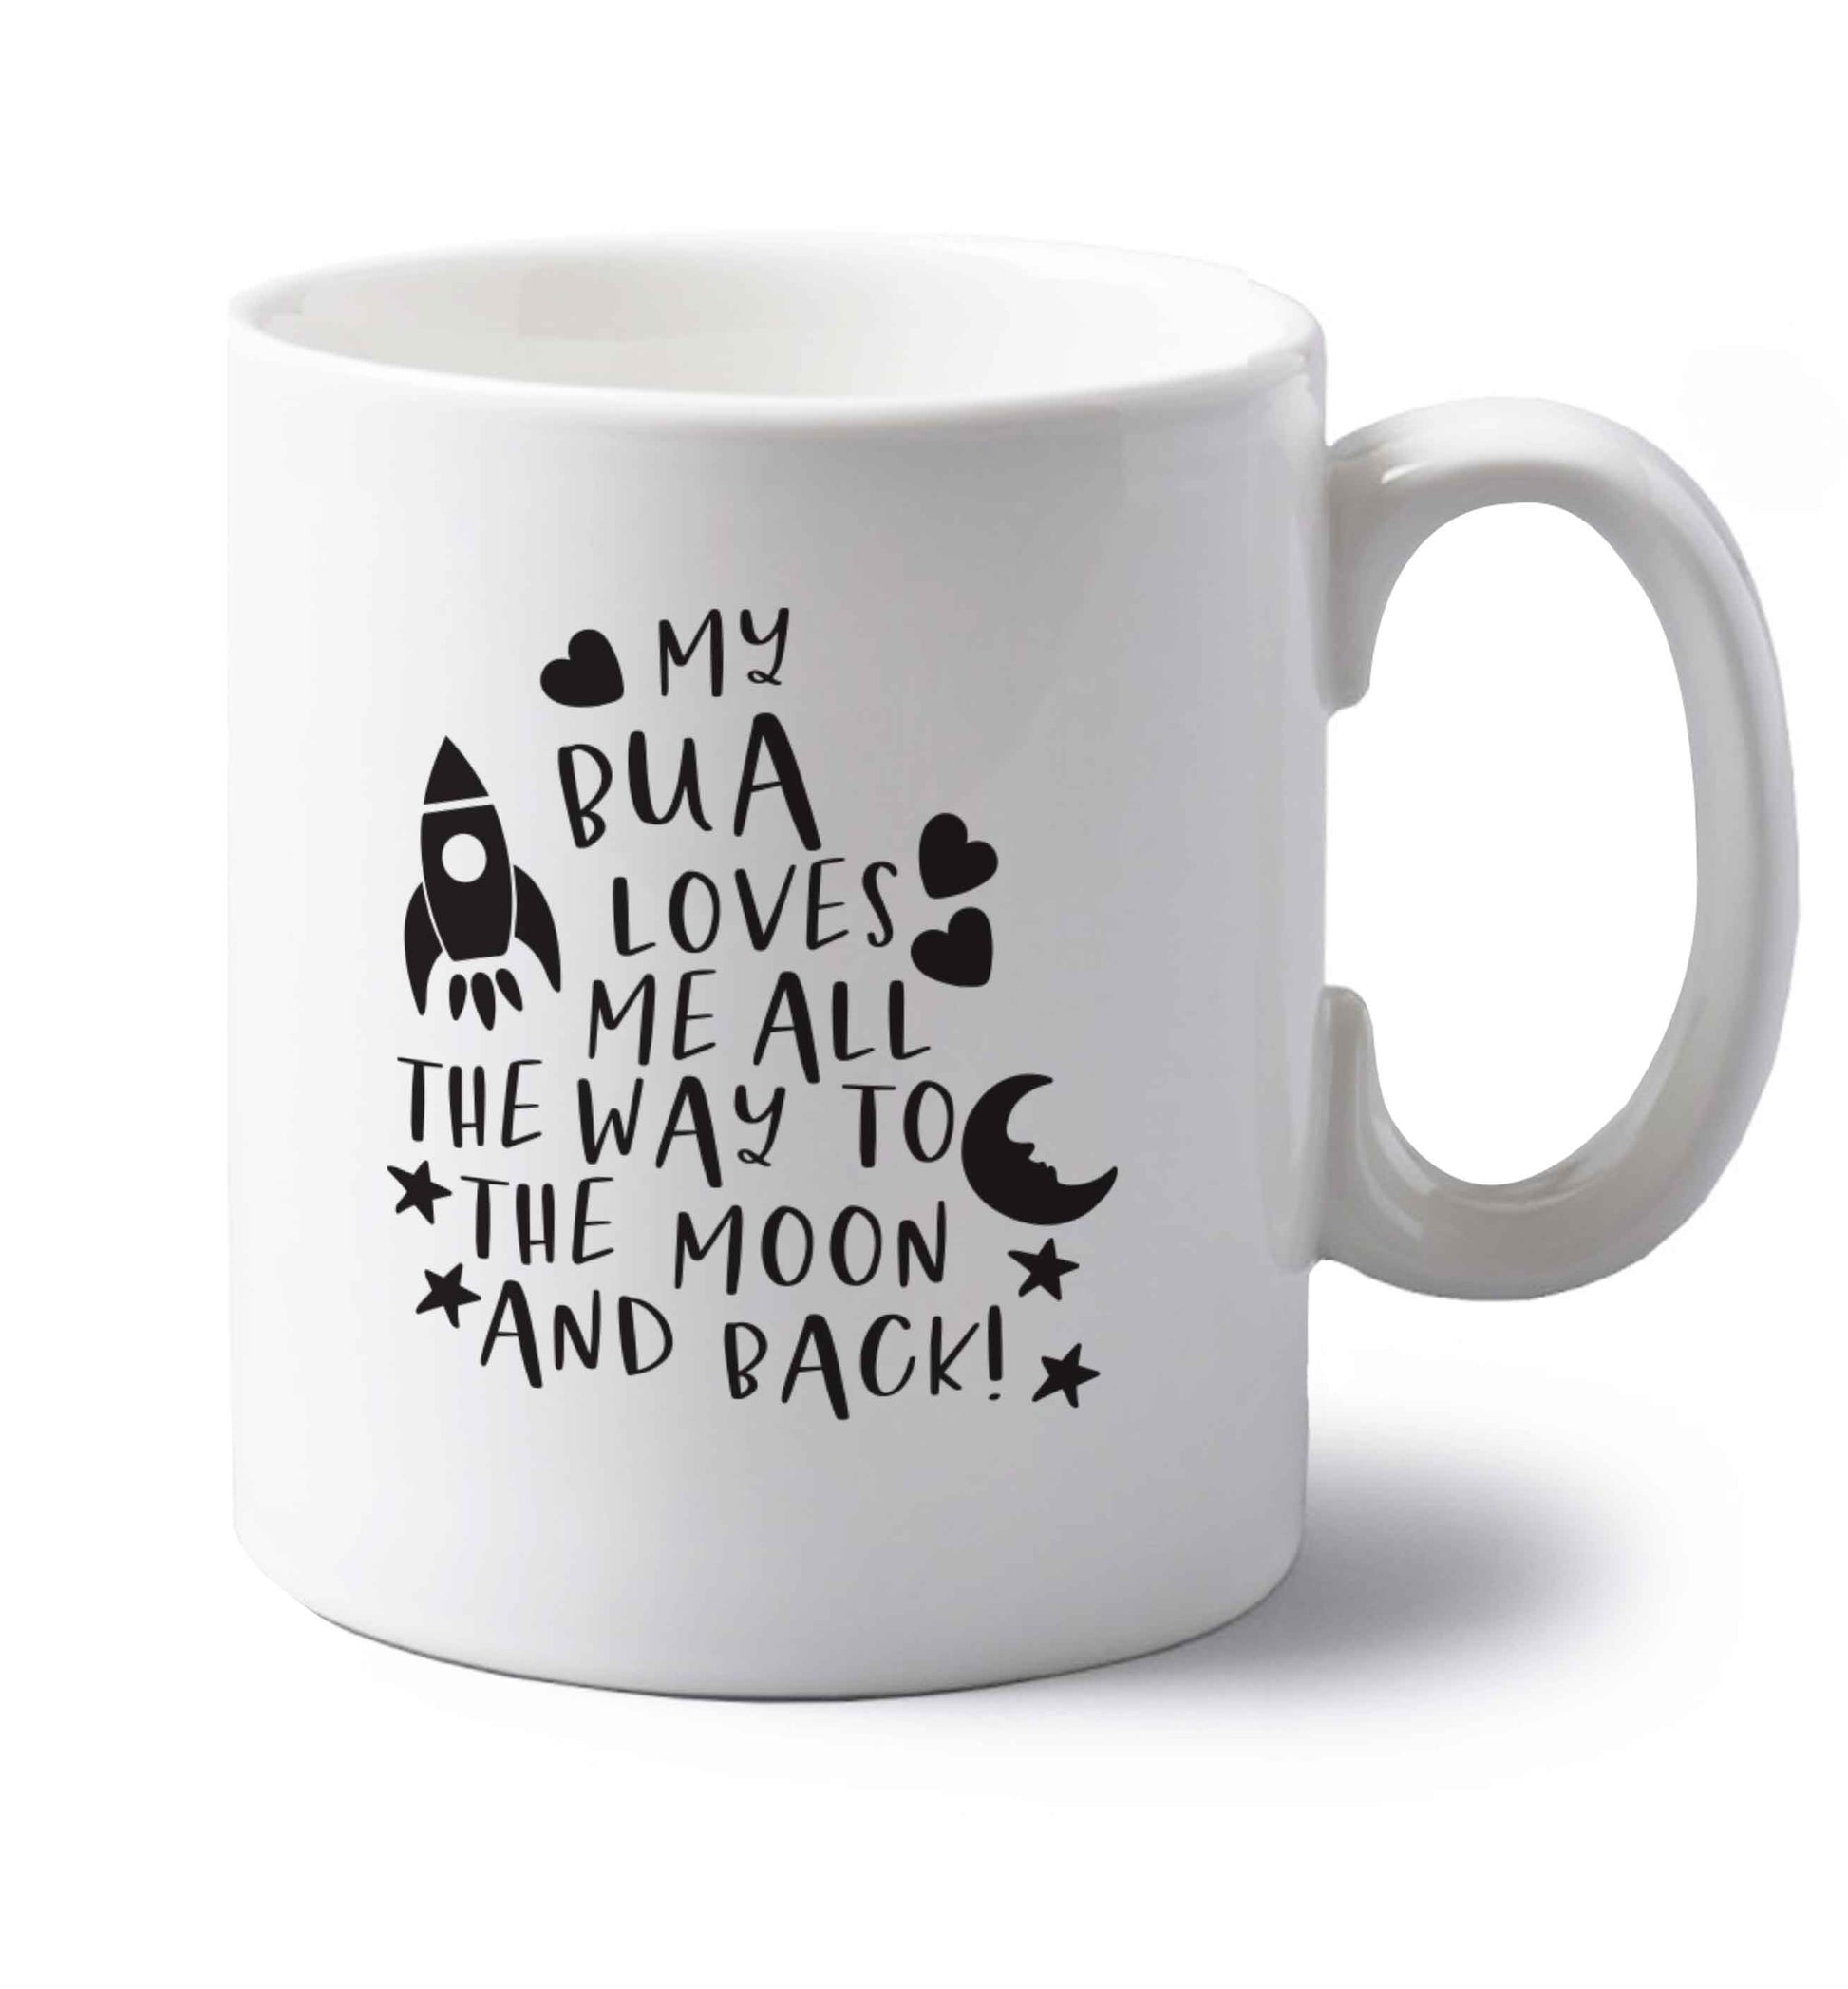 My bua loves me all they way to the moon and back left handed white ceramic mug 